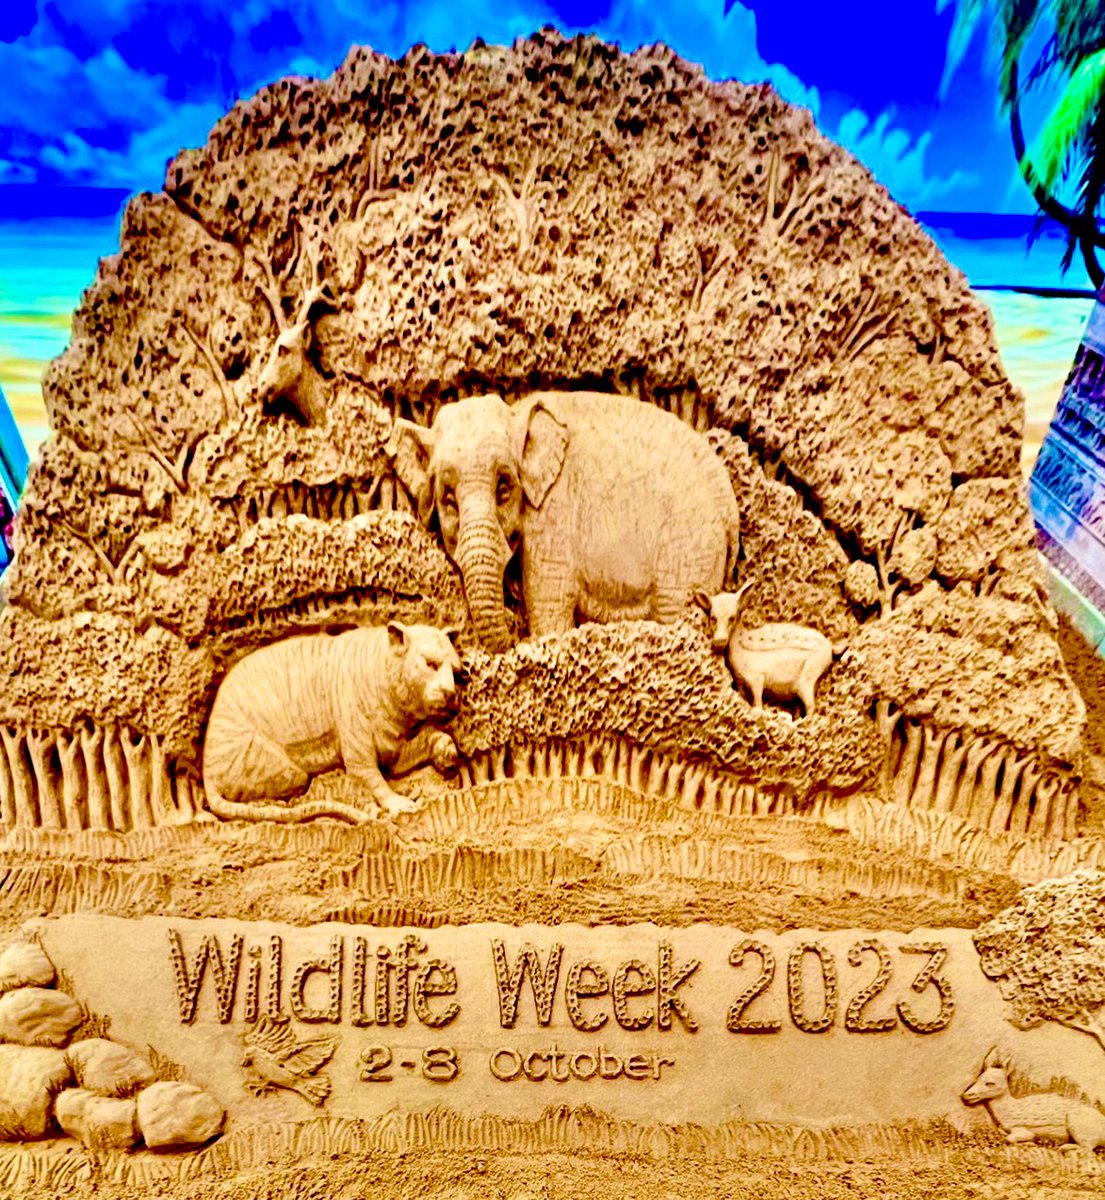 On the occasion of #NationalWildlifeWeek, my Sand Art at Bhubaneswar airport